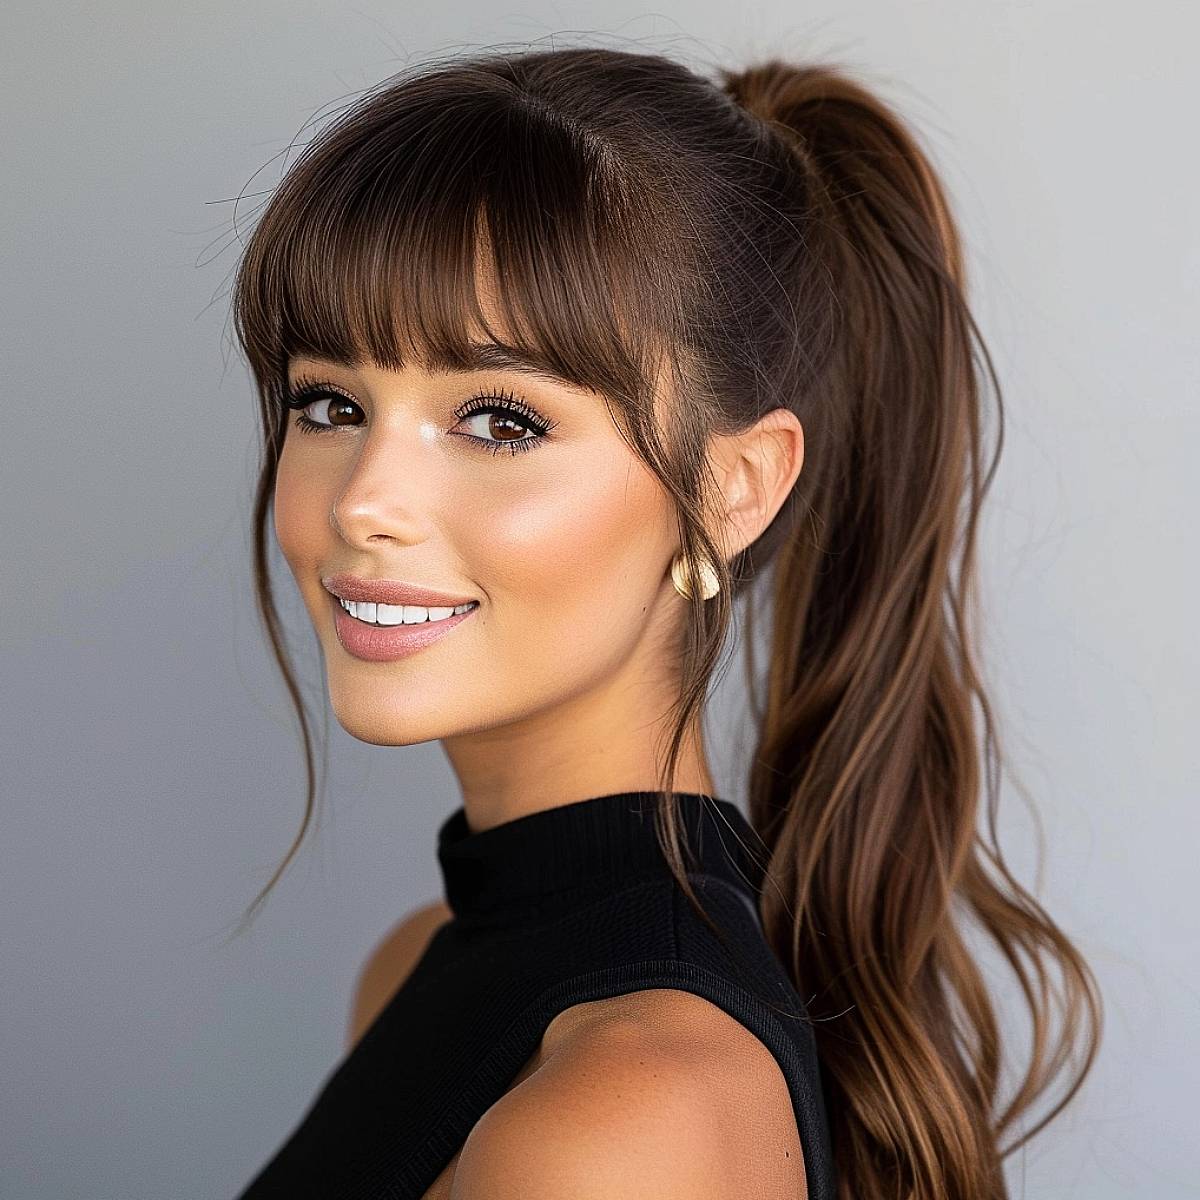 pony tail hairstyle with side bangs｜TikTok-Suche